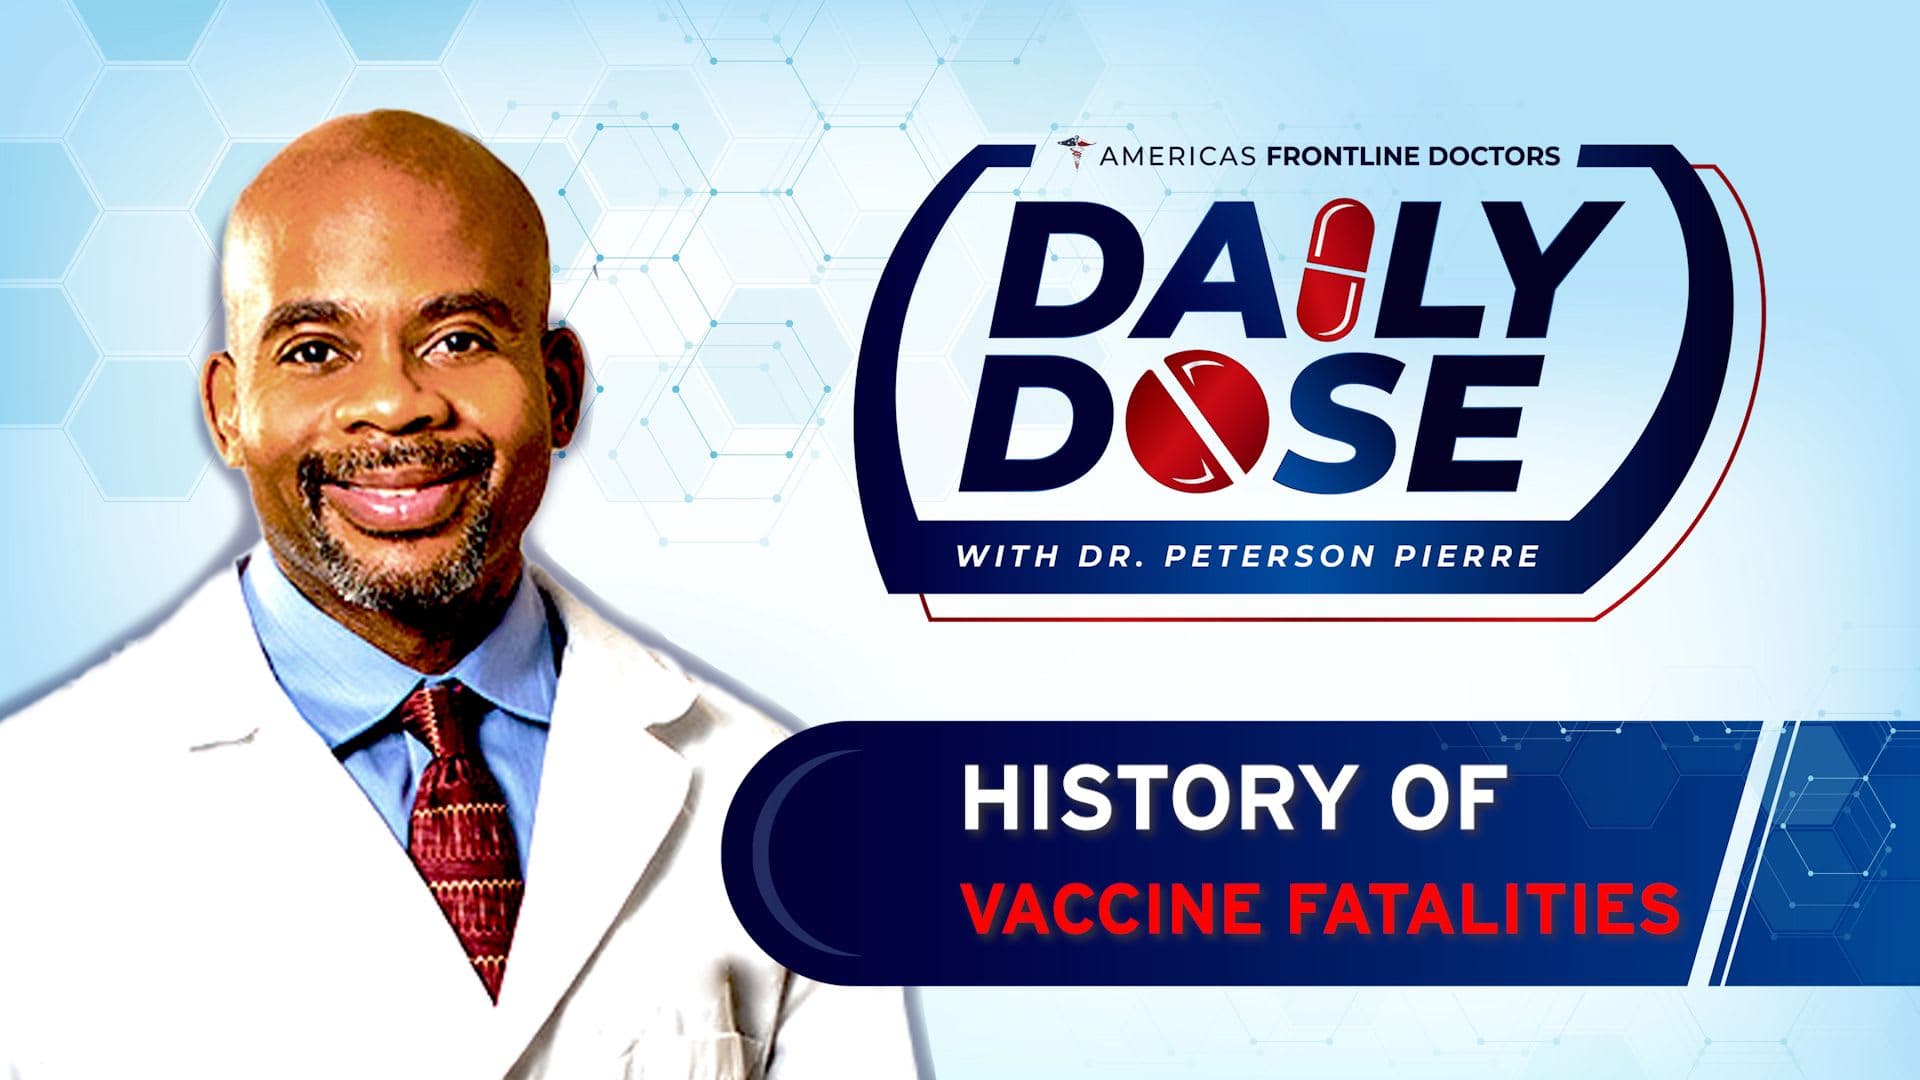 Daily Dose: 'History of Vaccine Fatalities' with Dr. Peterson Pierre